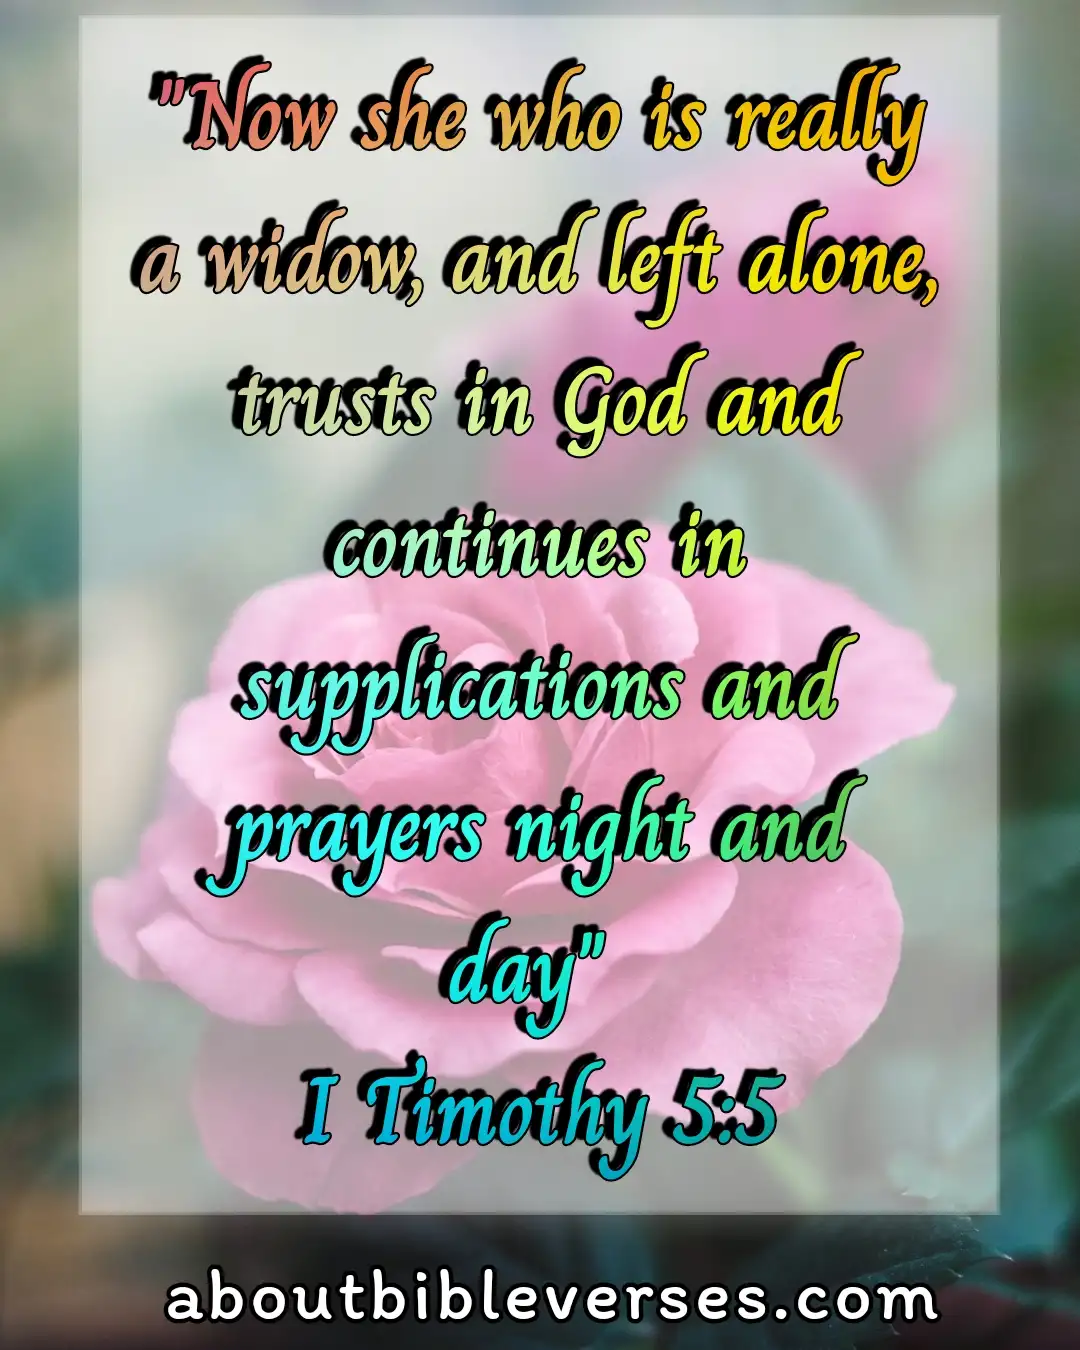 bible verses about widows (1 Timothy 5:5)